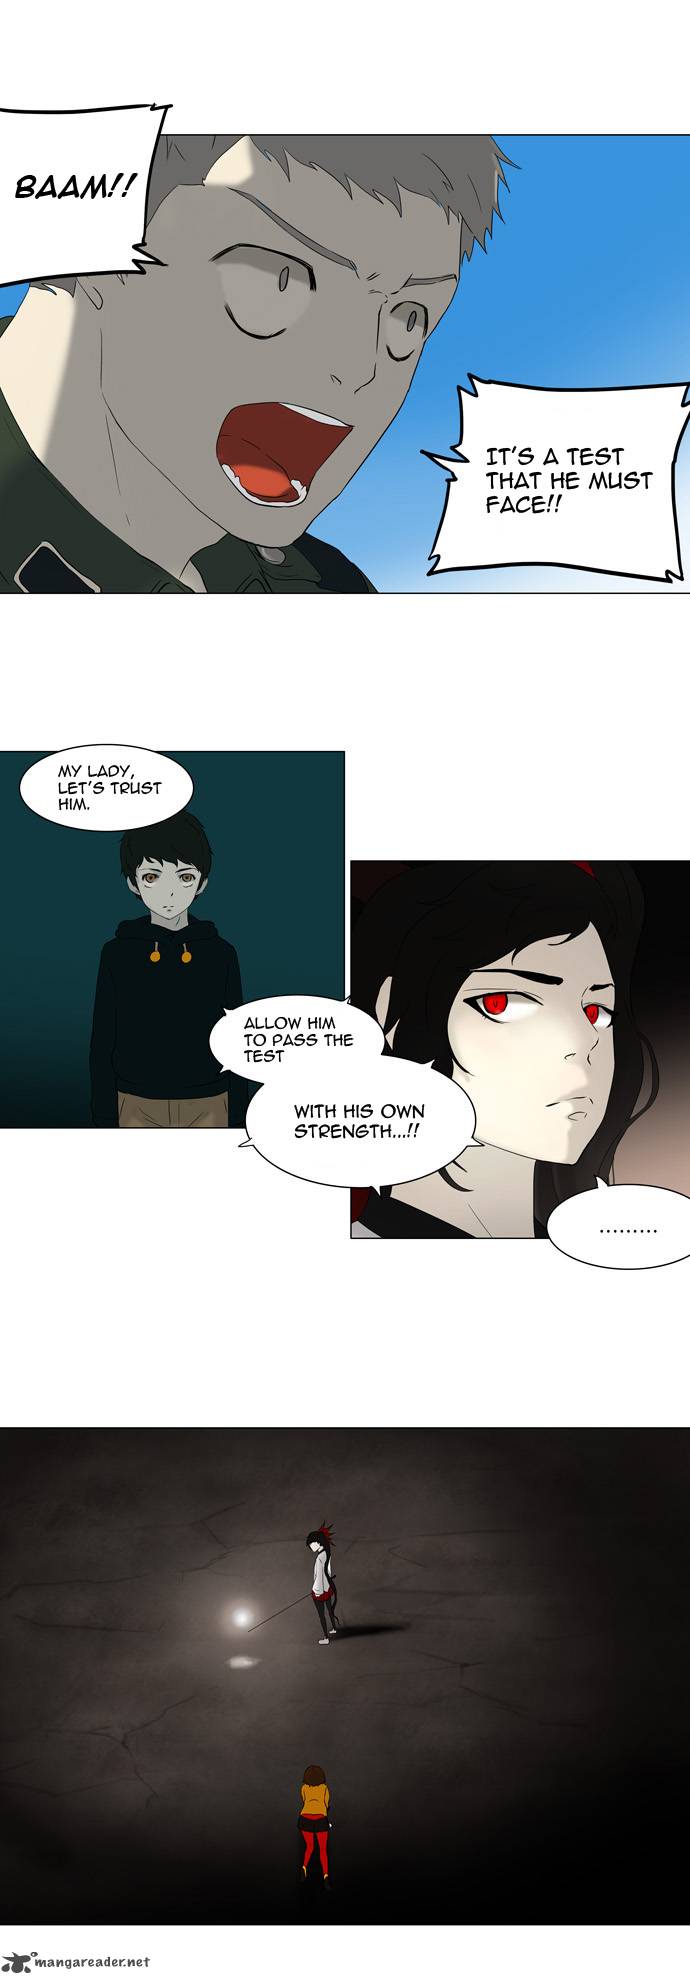 Tower Of God 72 17